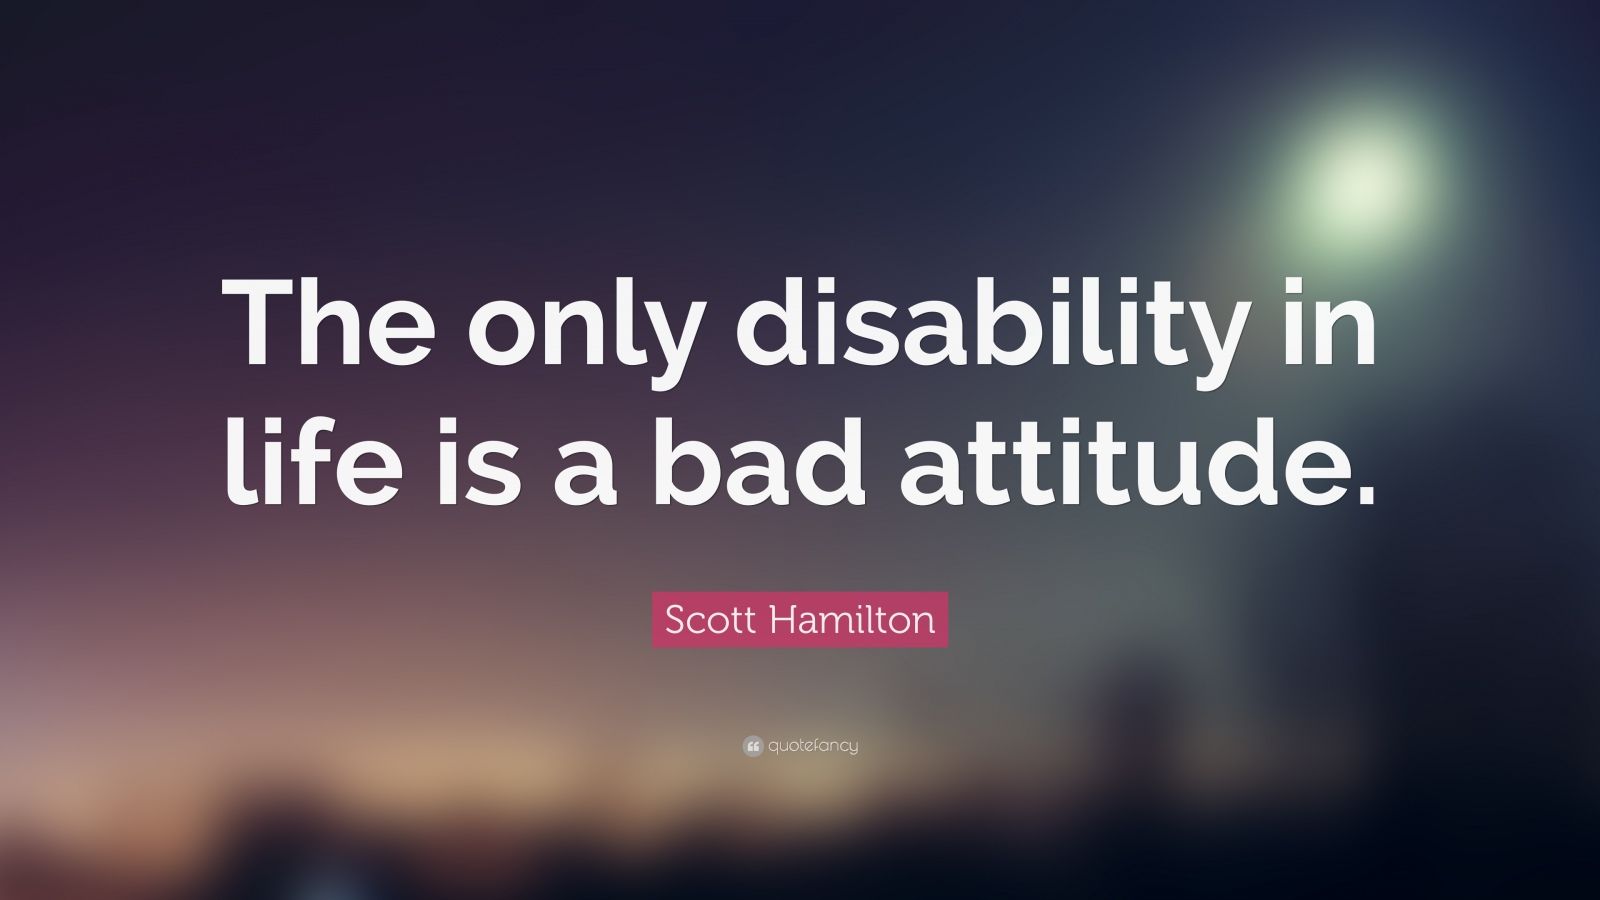 Scott Hamilton Quote: “The only disability in life is a bad attitude.” (24 wallpaper)